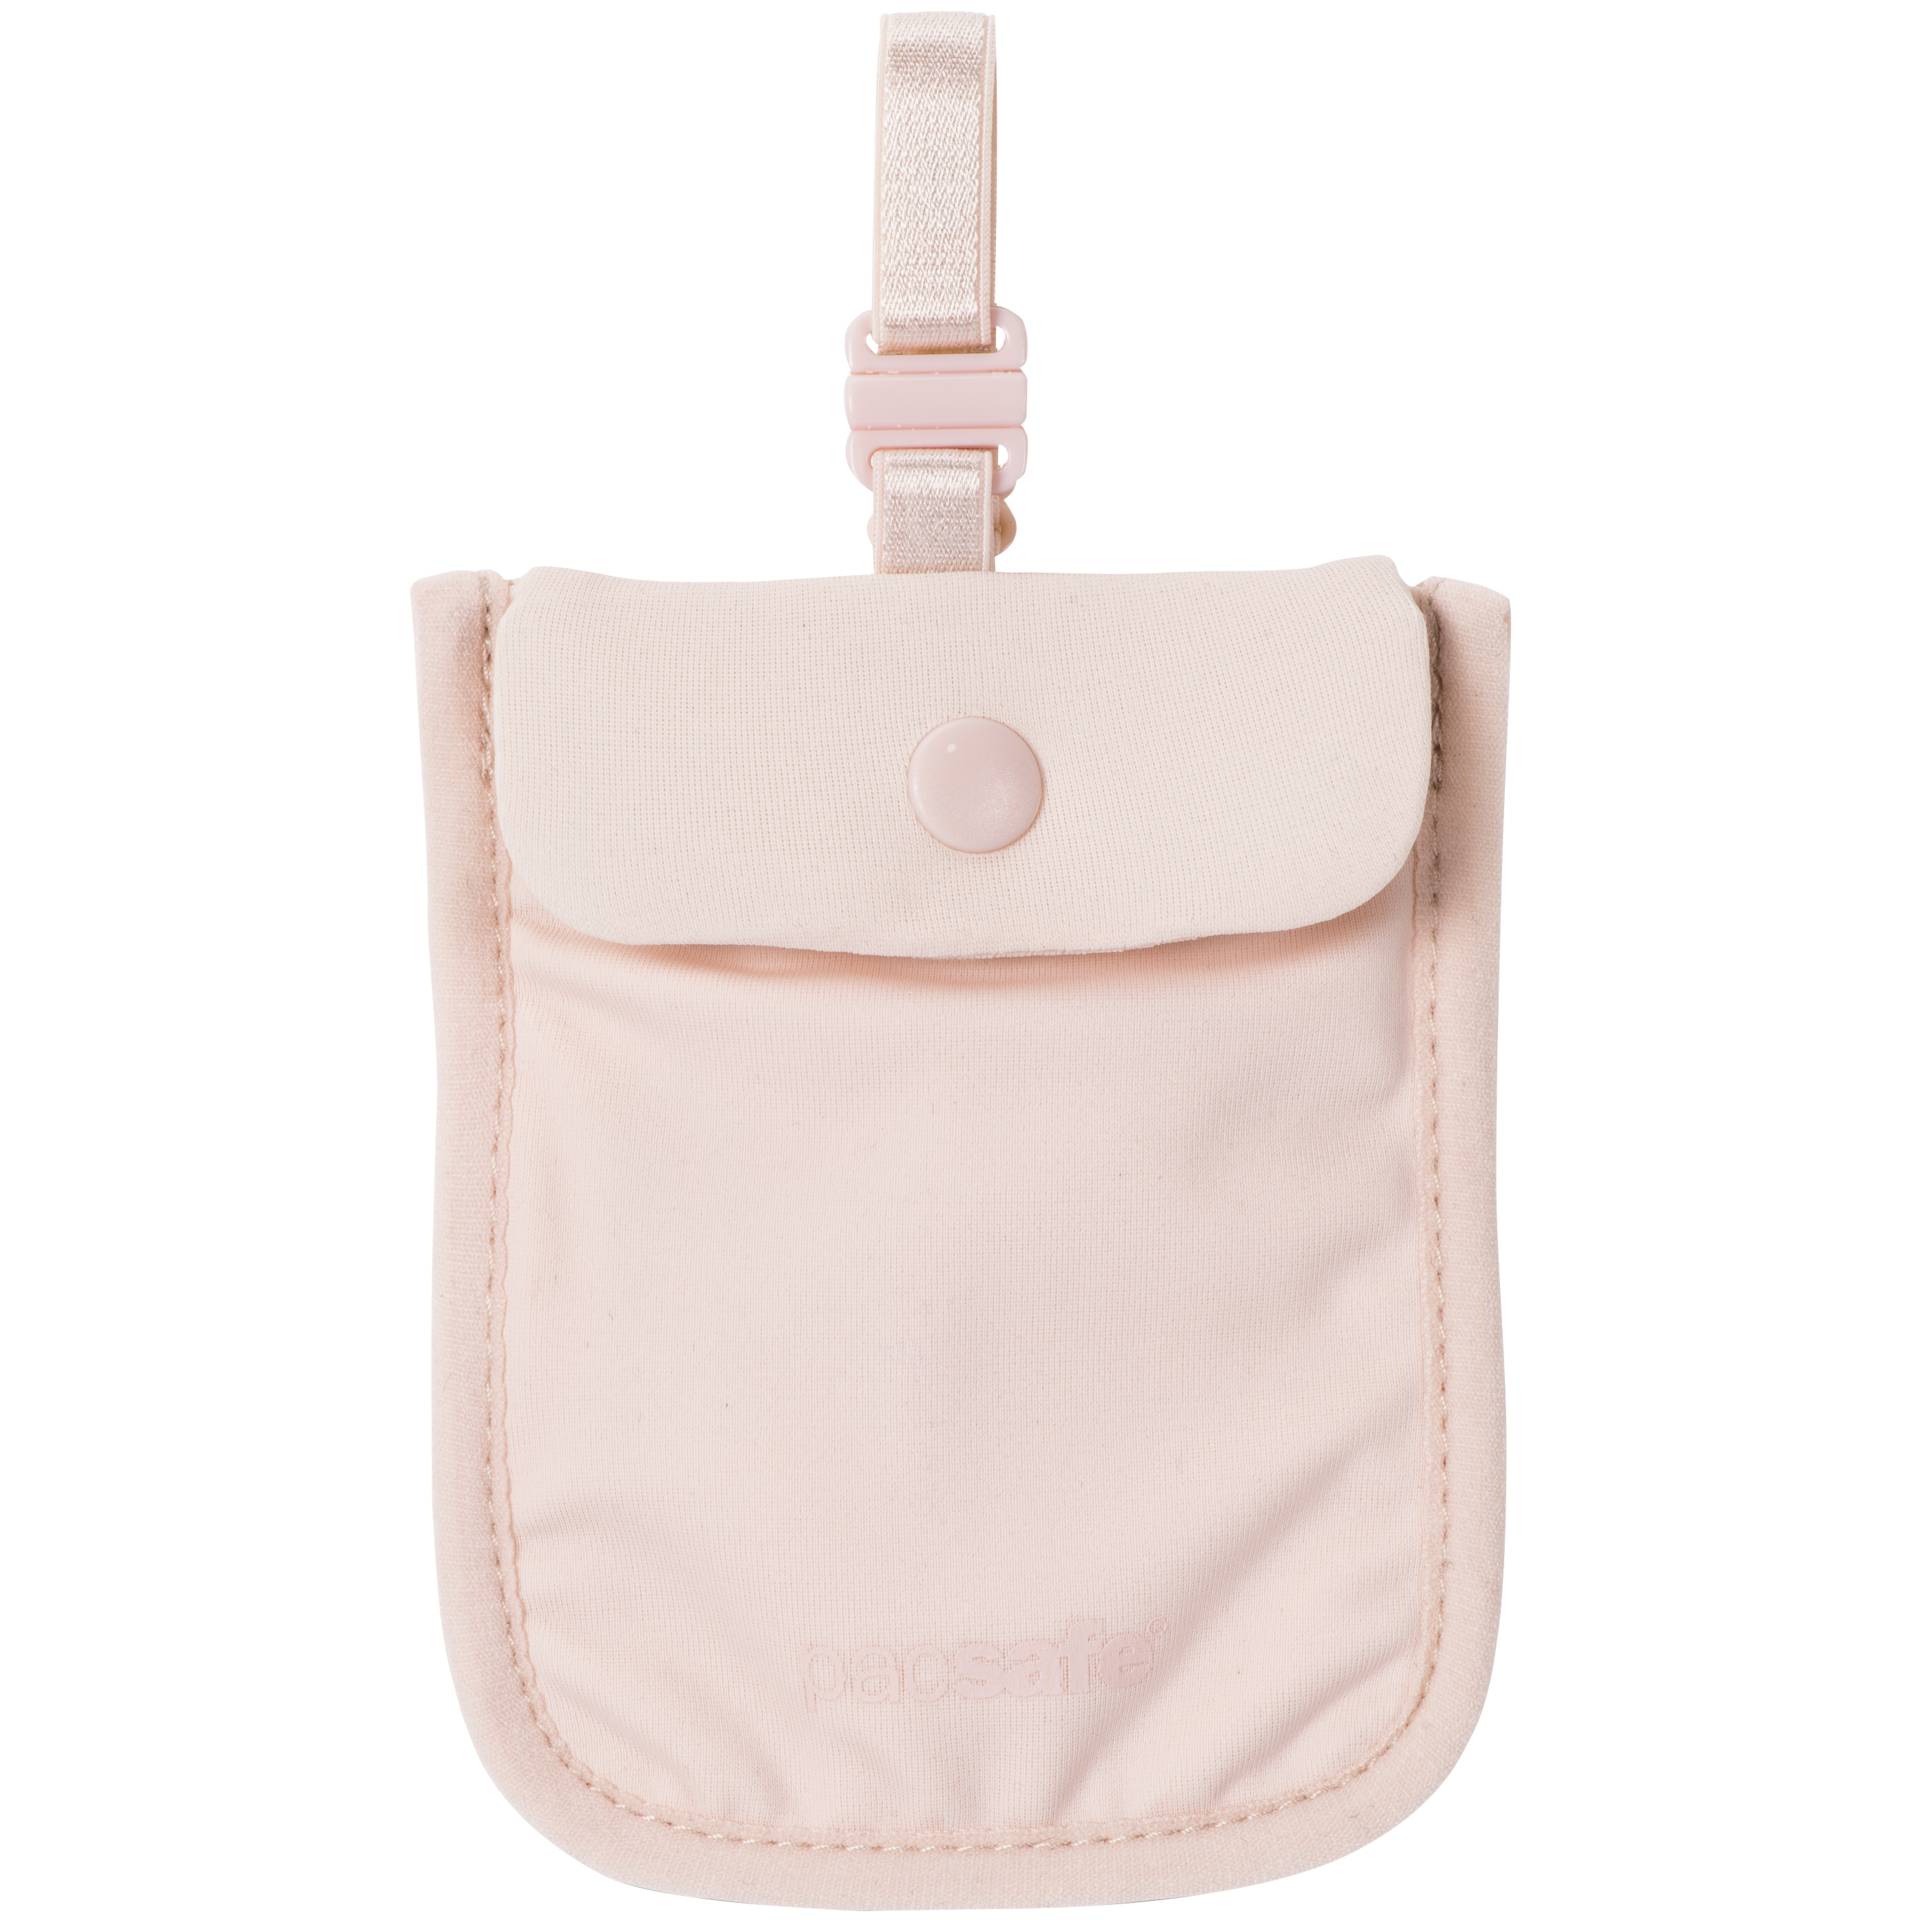 Pacsafe Coversafe S25 Bra Bag orchid pink